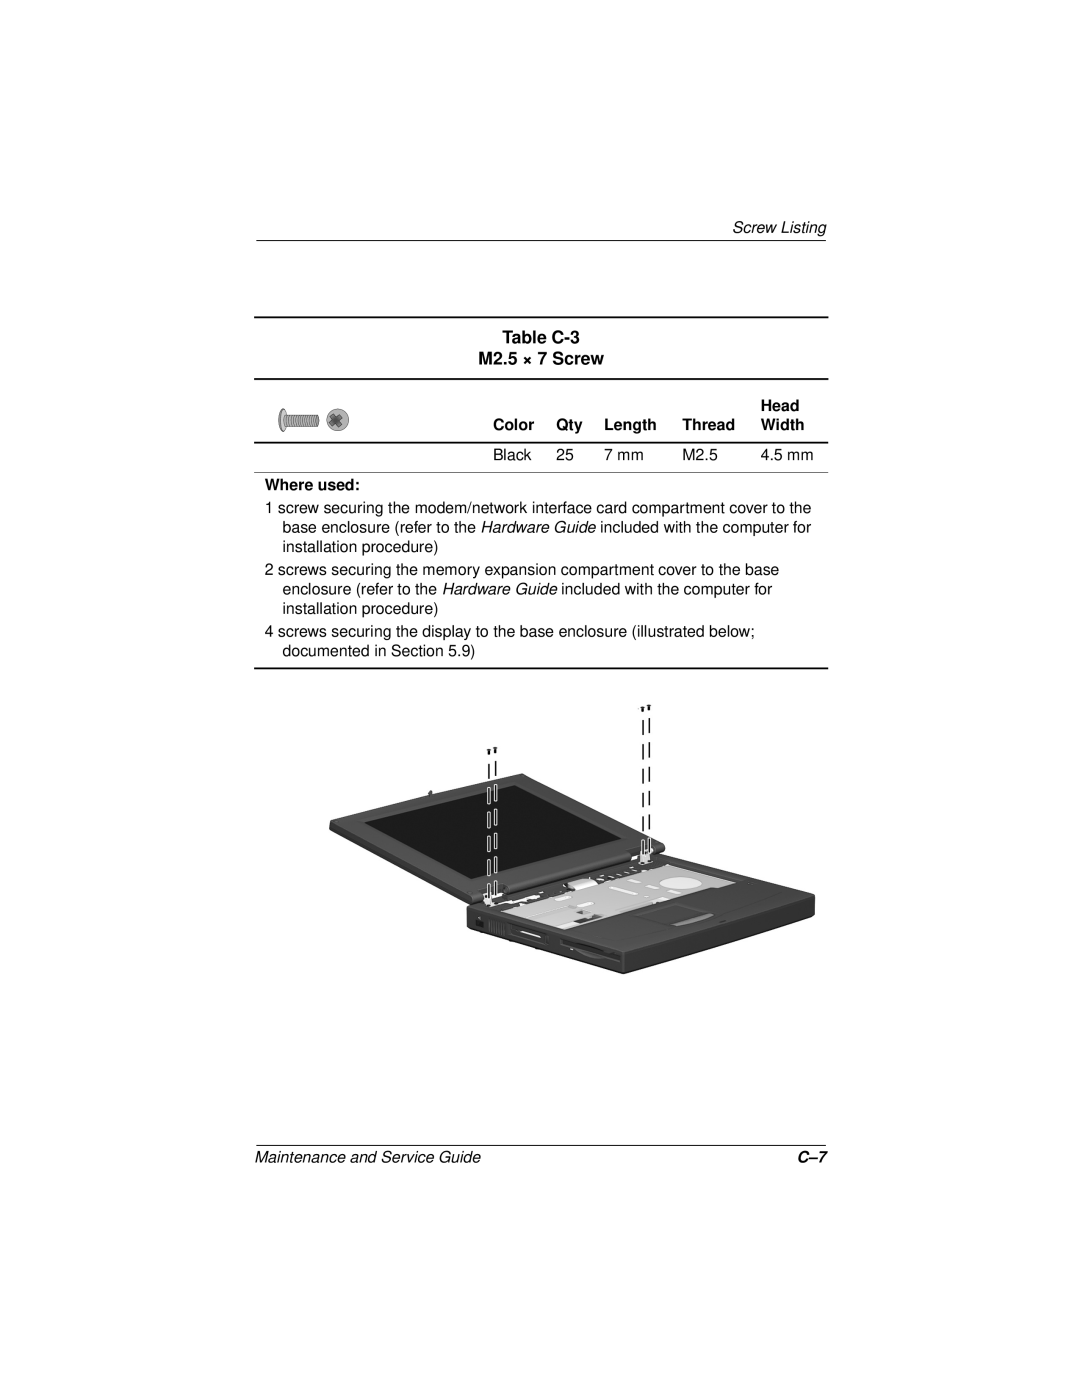 Compaq N110 manual Table C-3 M2.5 × 7 Screw, Screw Listing, Maintenance and Service Guide 